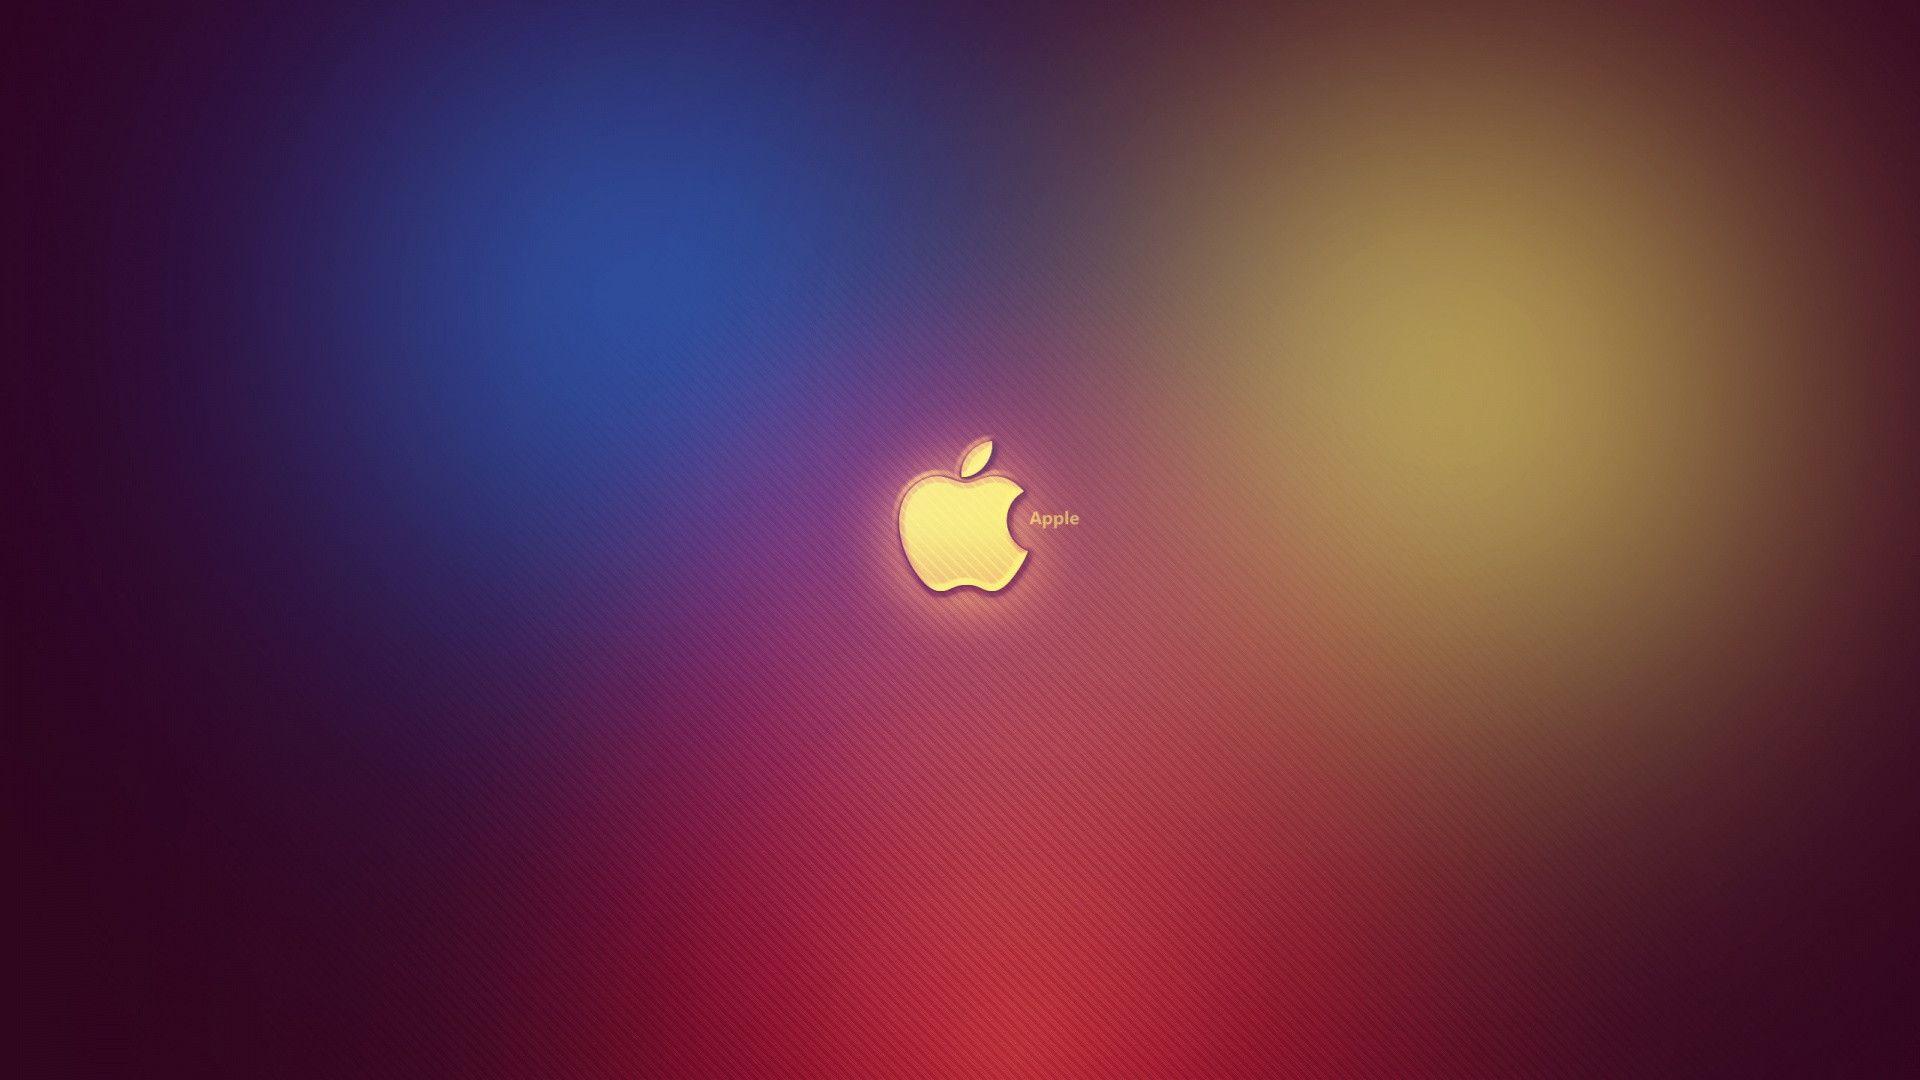 Best Wallpapers For Mac 1920x1080